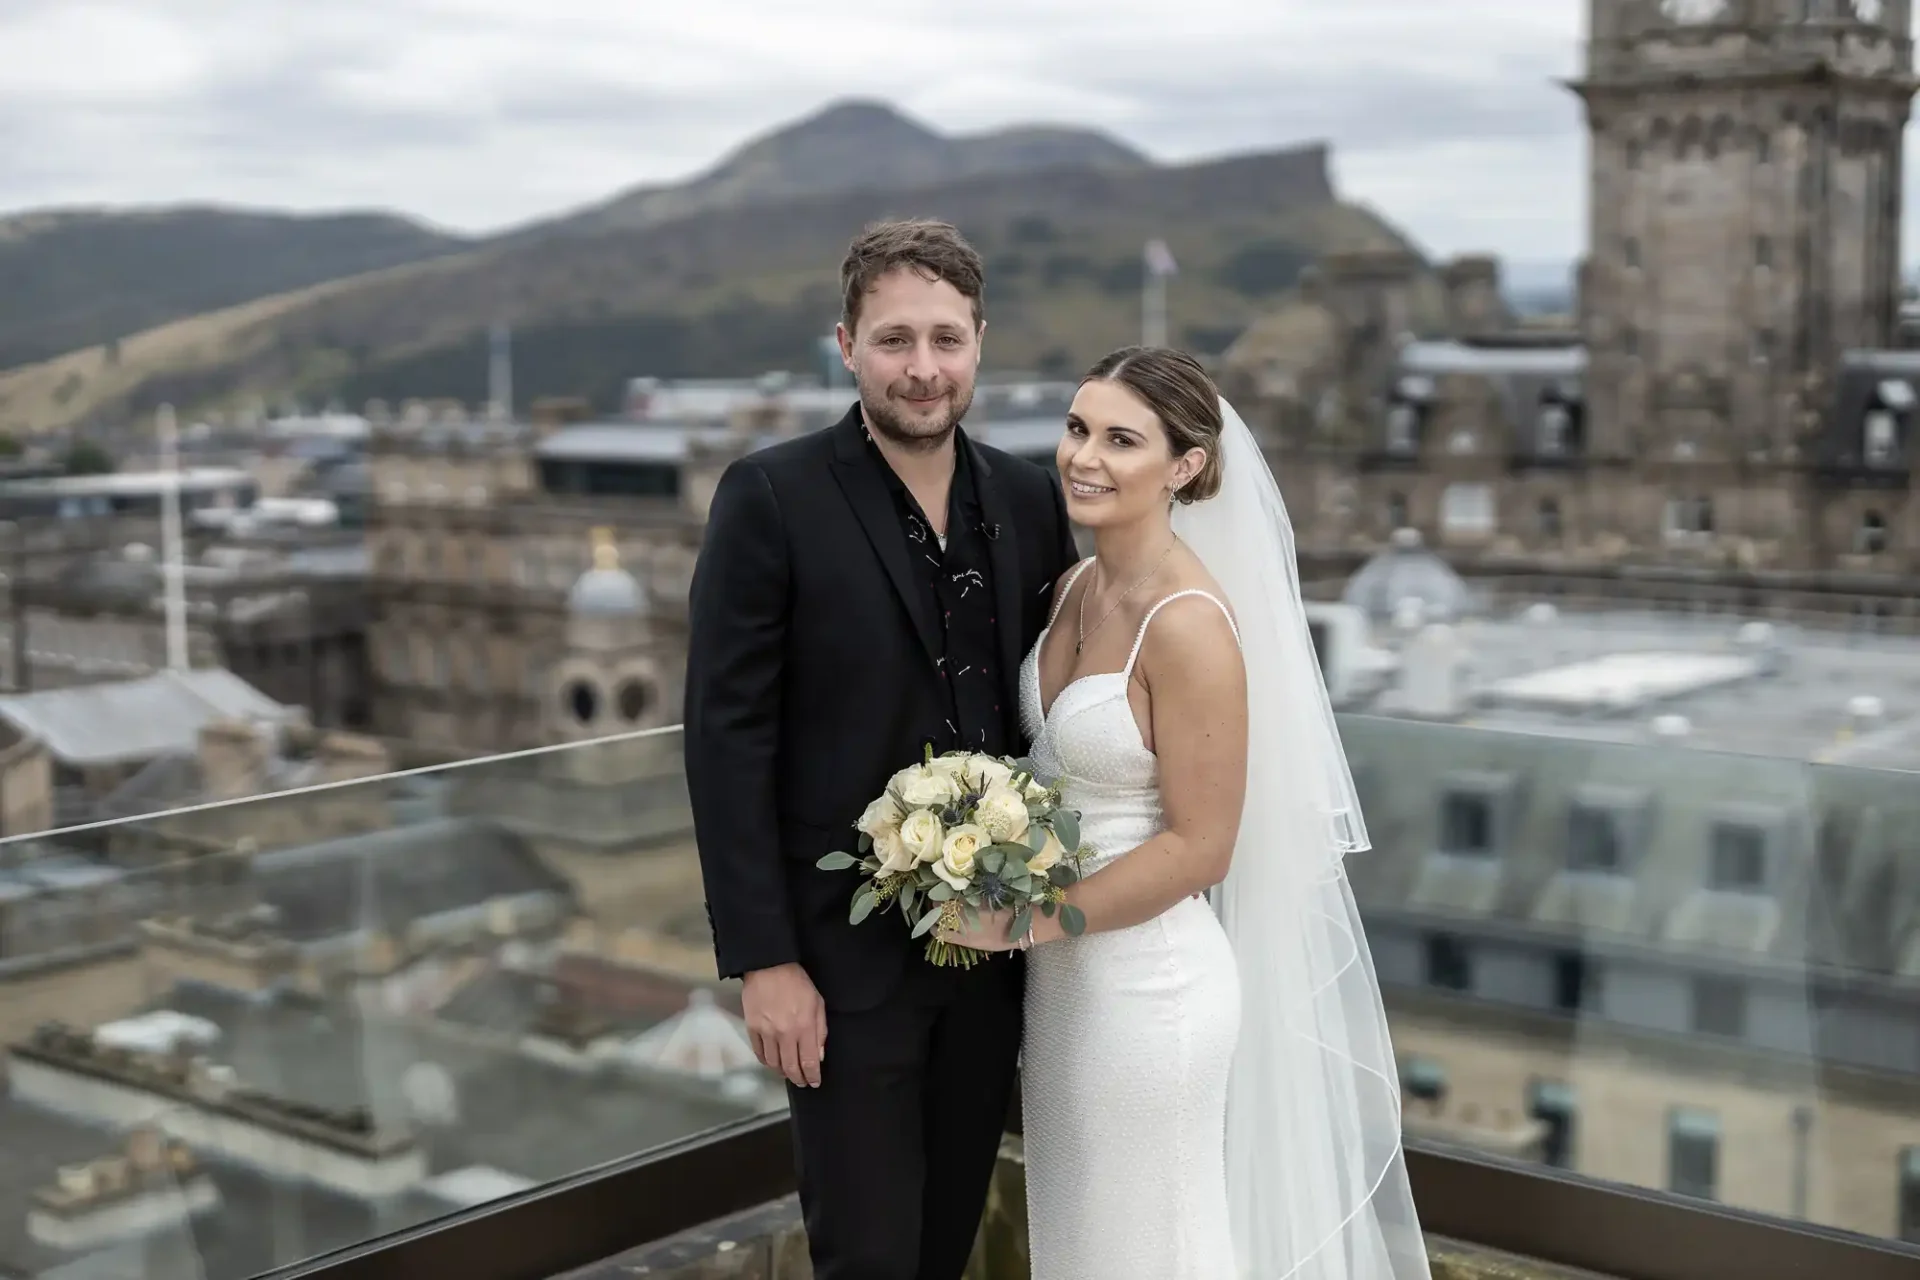 A bride and groom pose on a terrace with a cityscape and hills in the background, the bride holding a bouquet.